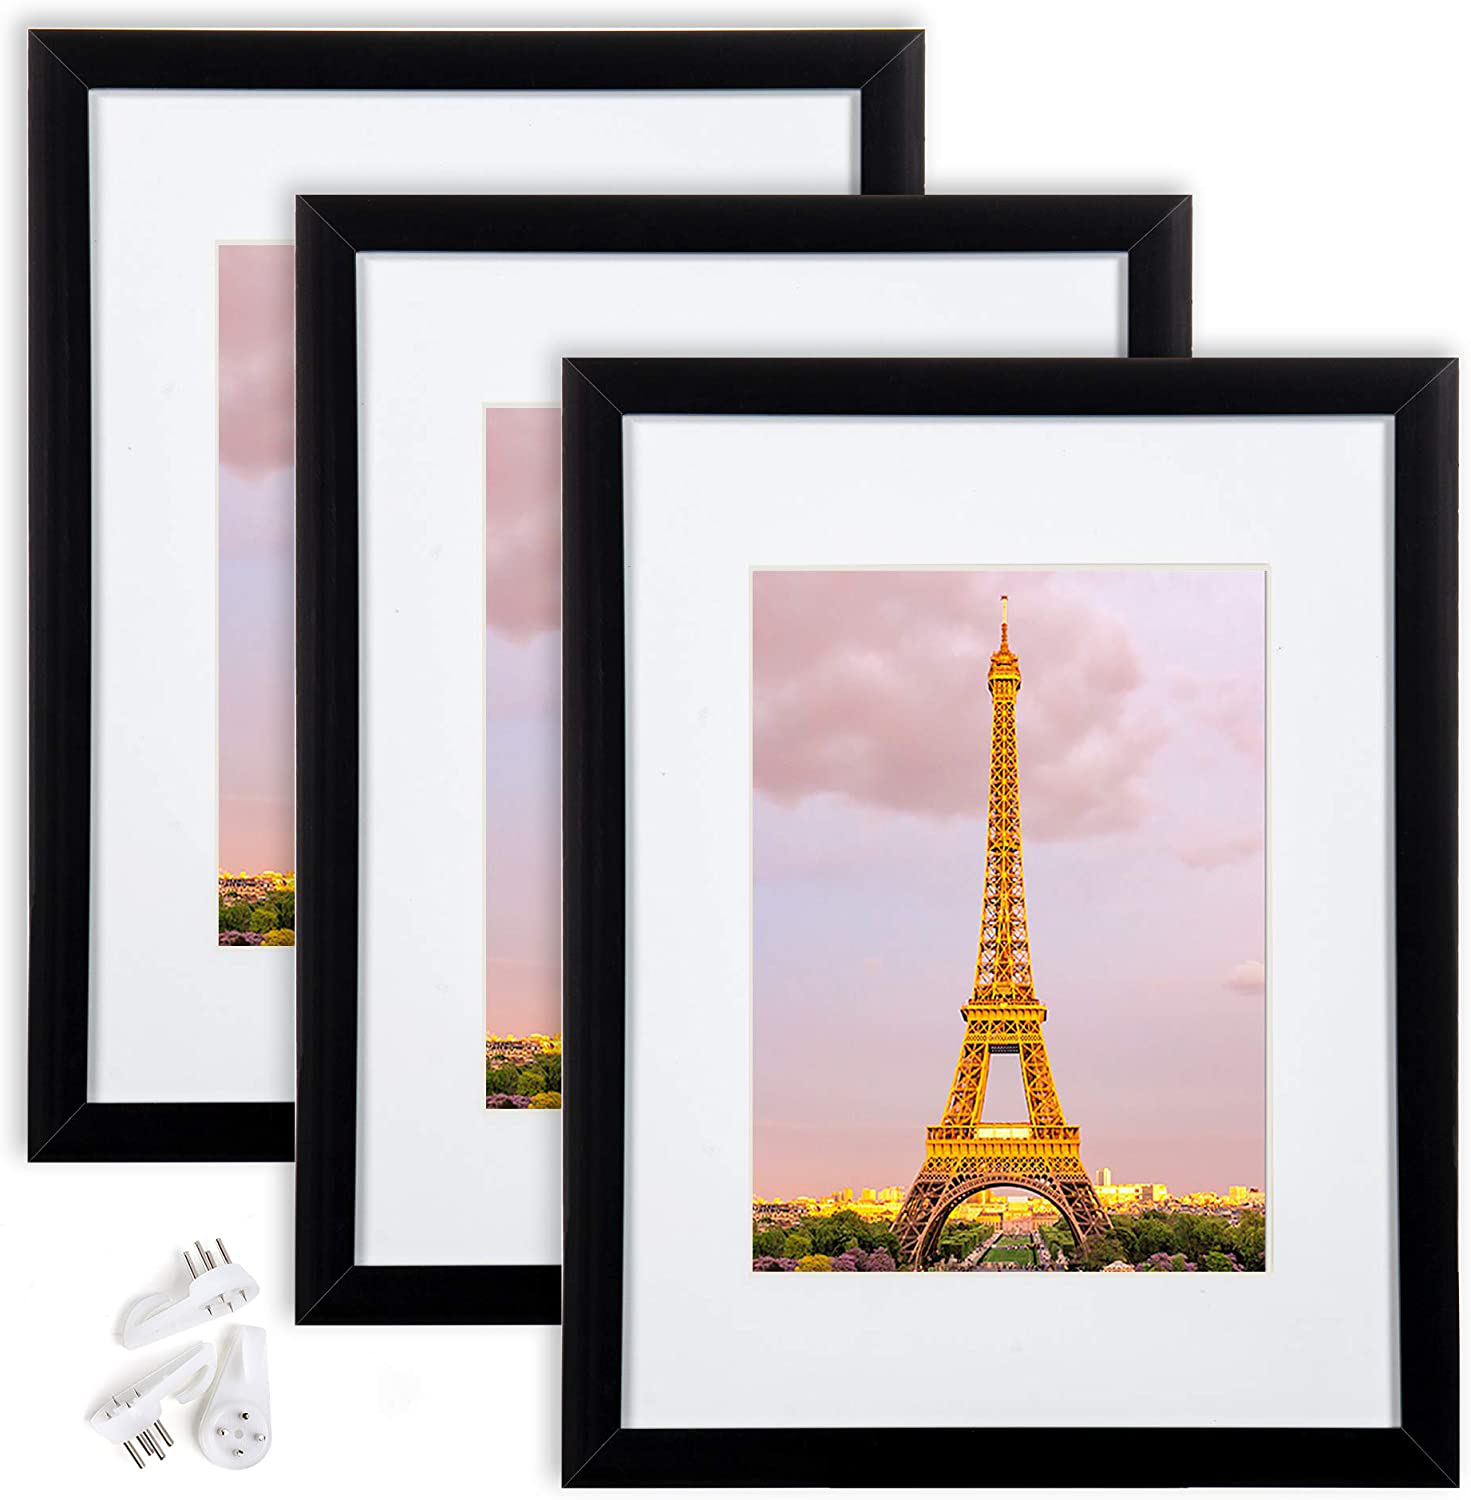 upsimples 8.5x11 Picture Frame Set of 3,Made of High Definition Glass for 6x8 with Mat or 8.5x11 Without Mat,Wall Mounting Photo Frame Vintage Black